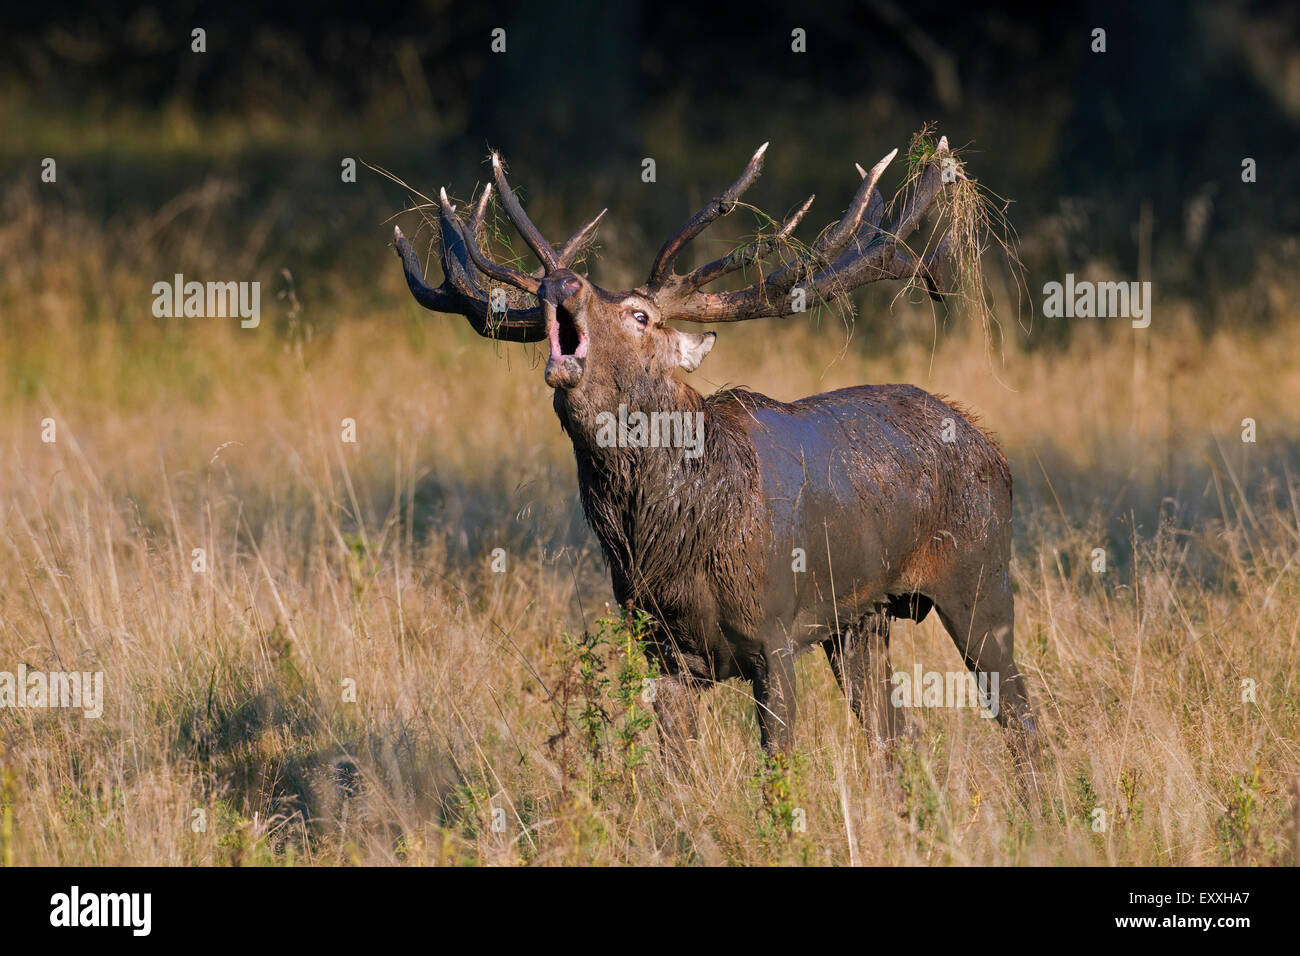 Red deer (Cervus elaphus) stag with antlers and coat covered in mud roaring in meadow at forest's edge during the rut in autumn Stock Photo